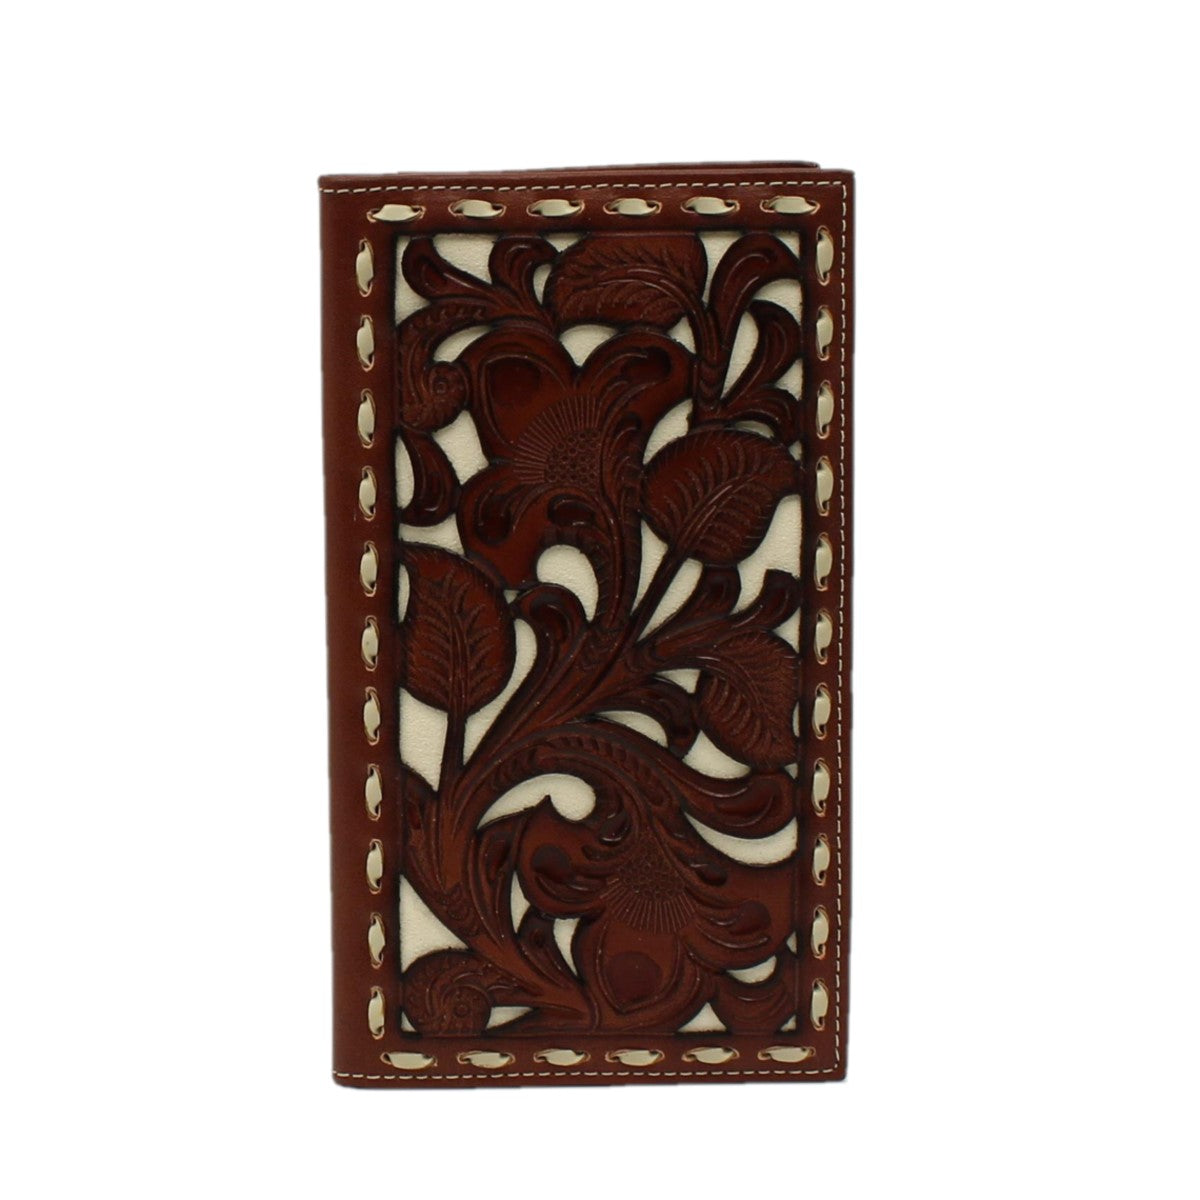 Nocona Men's Rodeo Leather Pierced Overlay Laced Tan Wallet